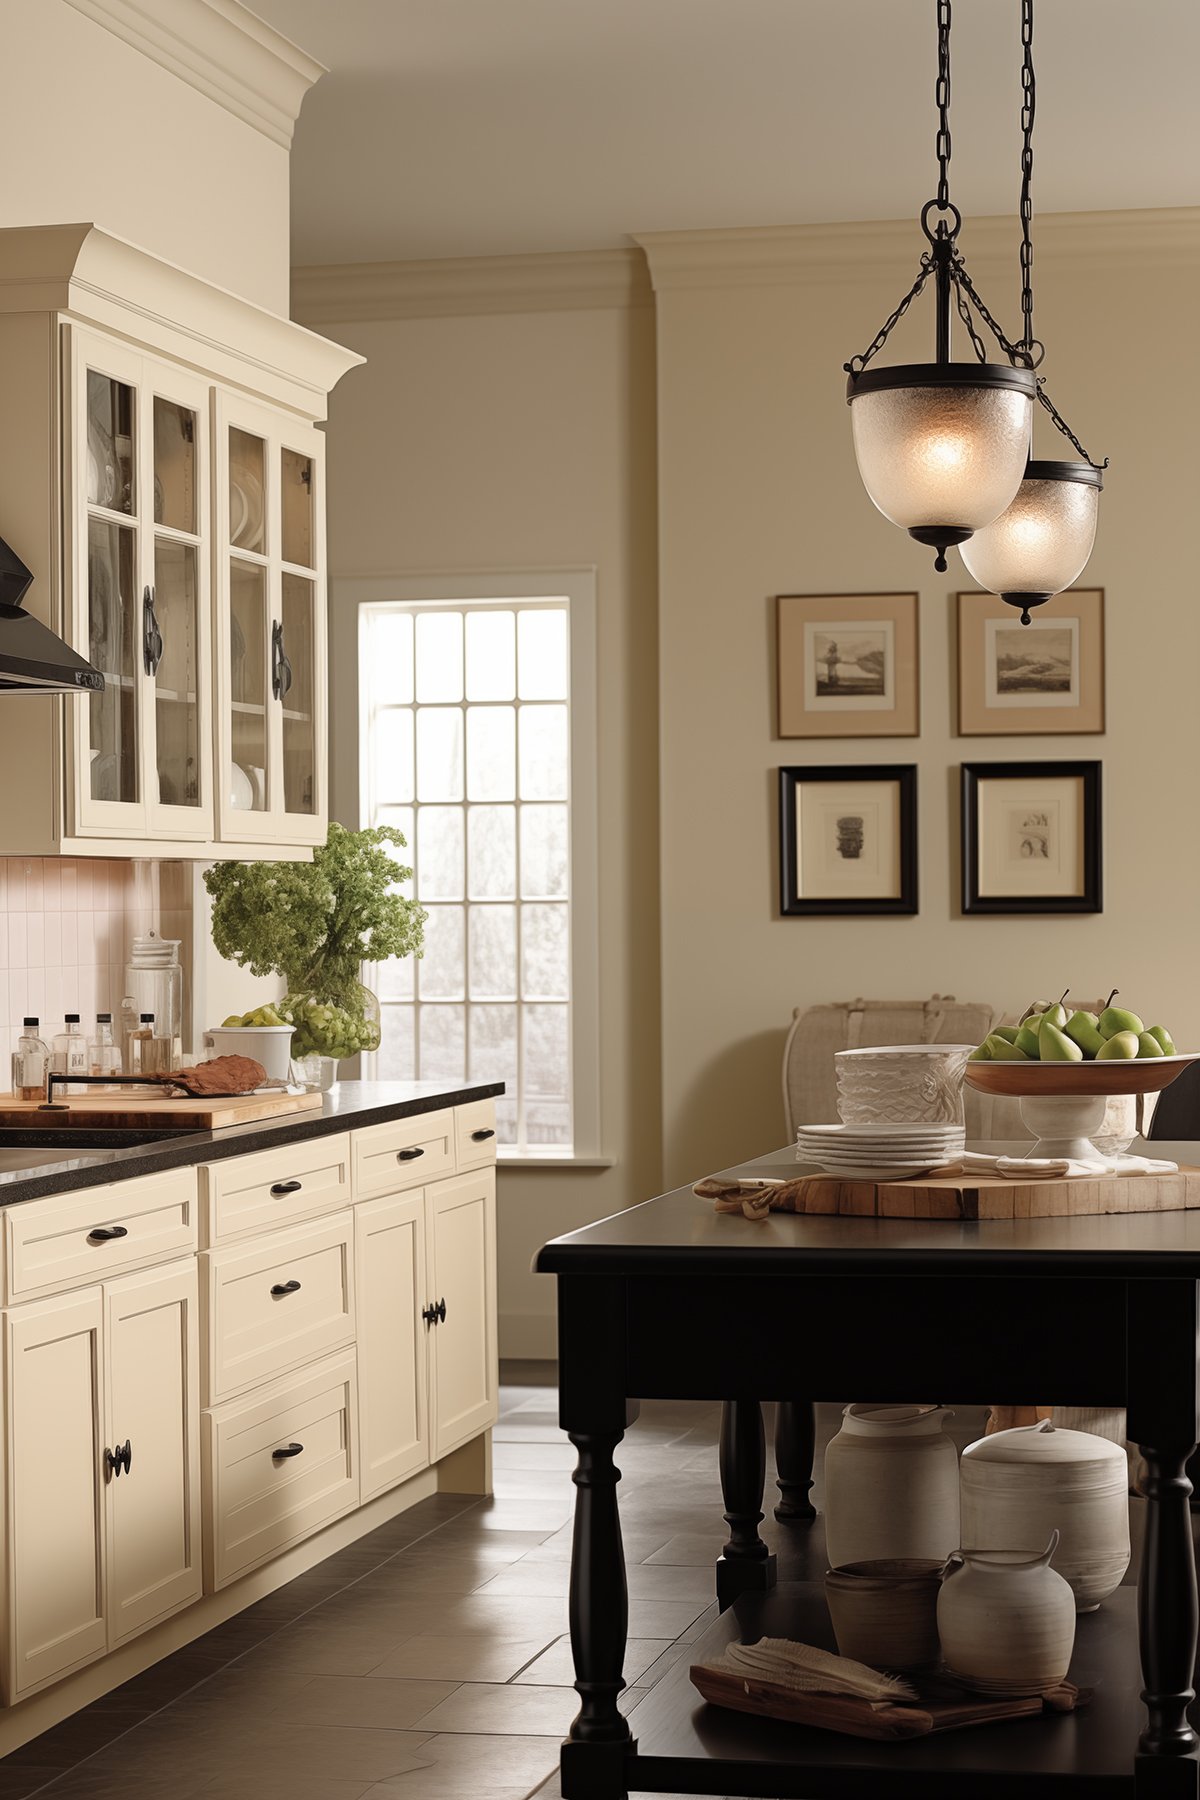 Kitchen walls painted Benjamin Moore Bleeker Beige HC-45. Cabinets are a cream color with black granite countertops and black hardware.